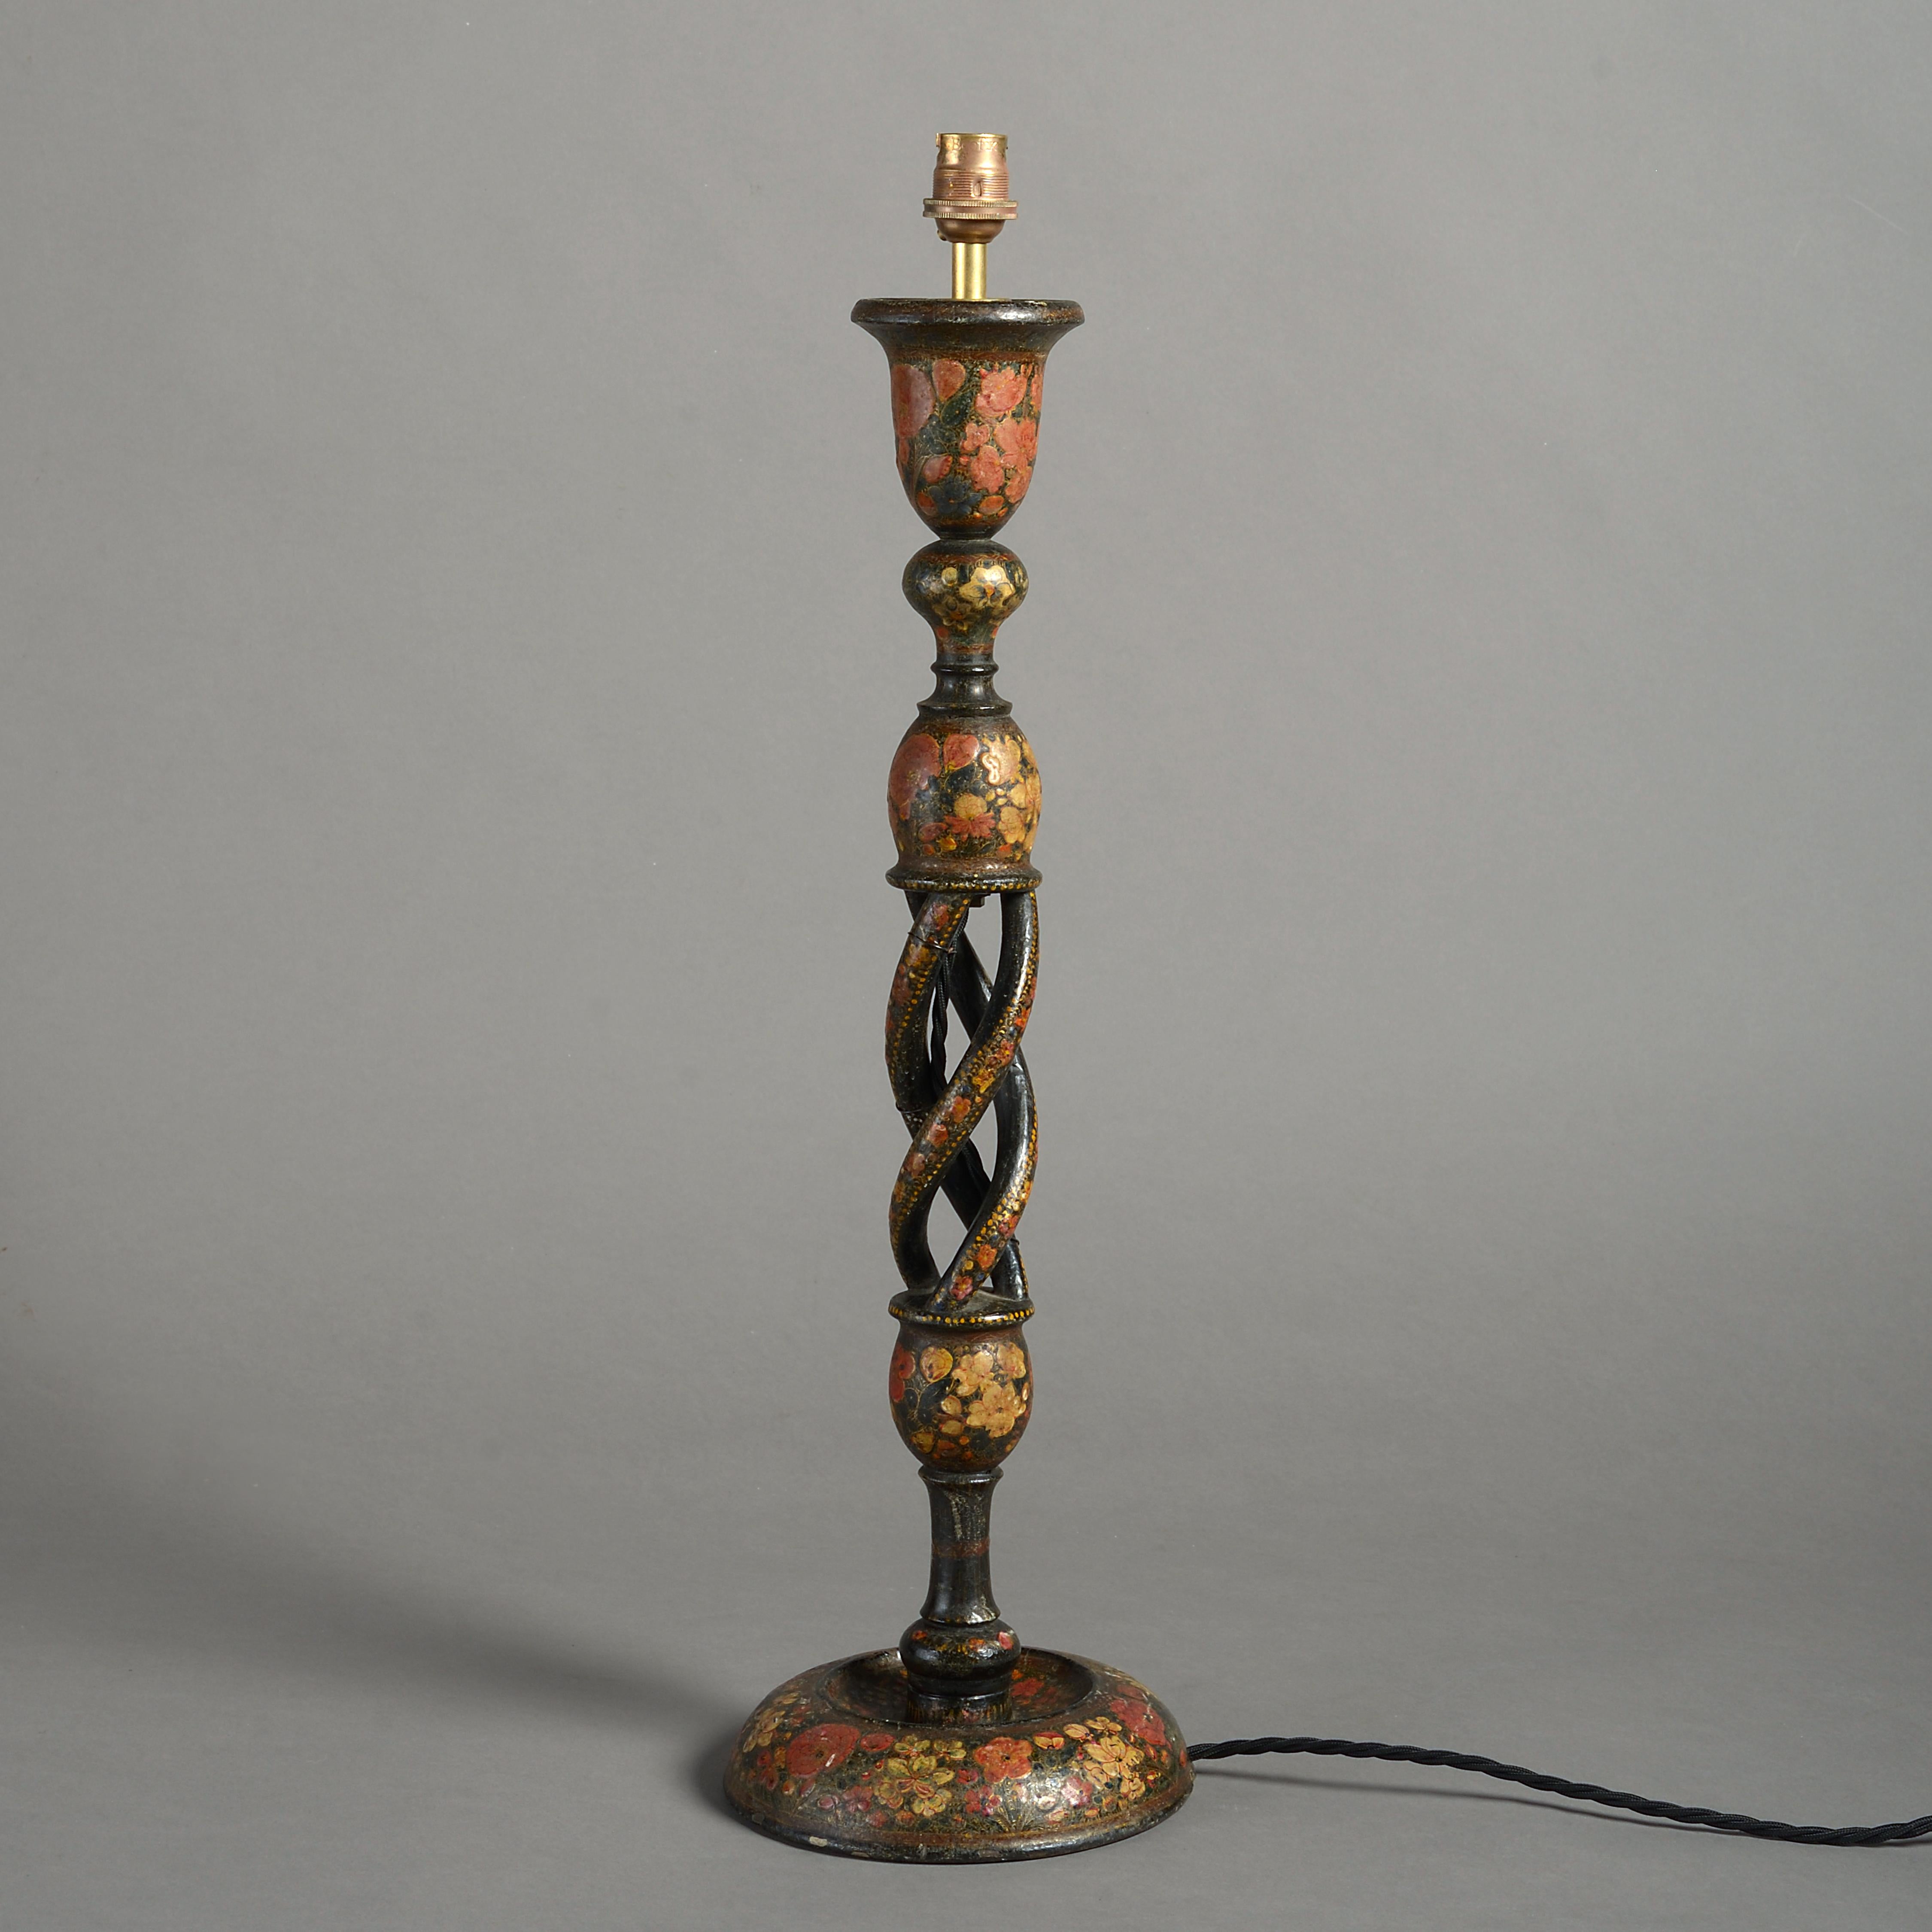 An early 20th century Kashmiri candlestick table lamp base, having a turned body with floral decoration throughout.